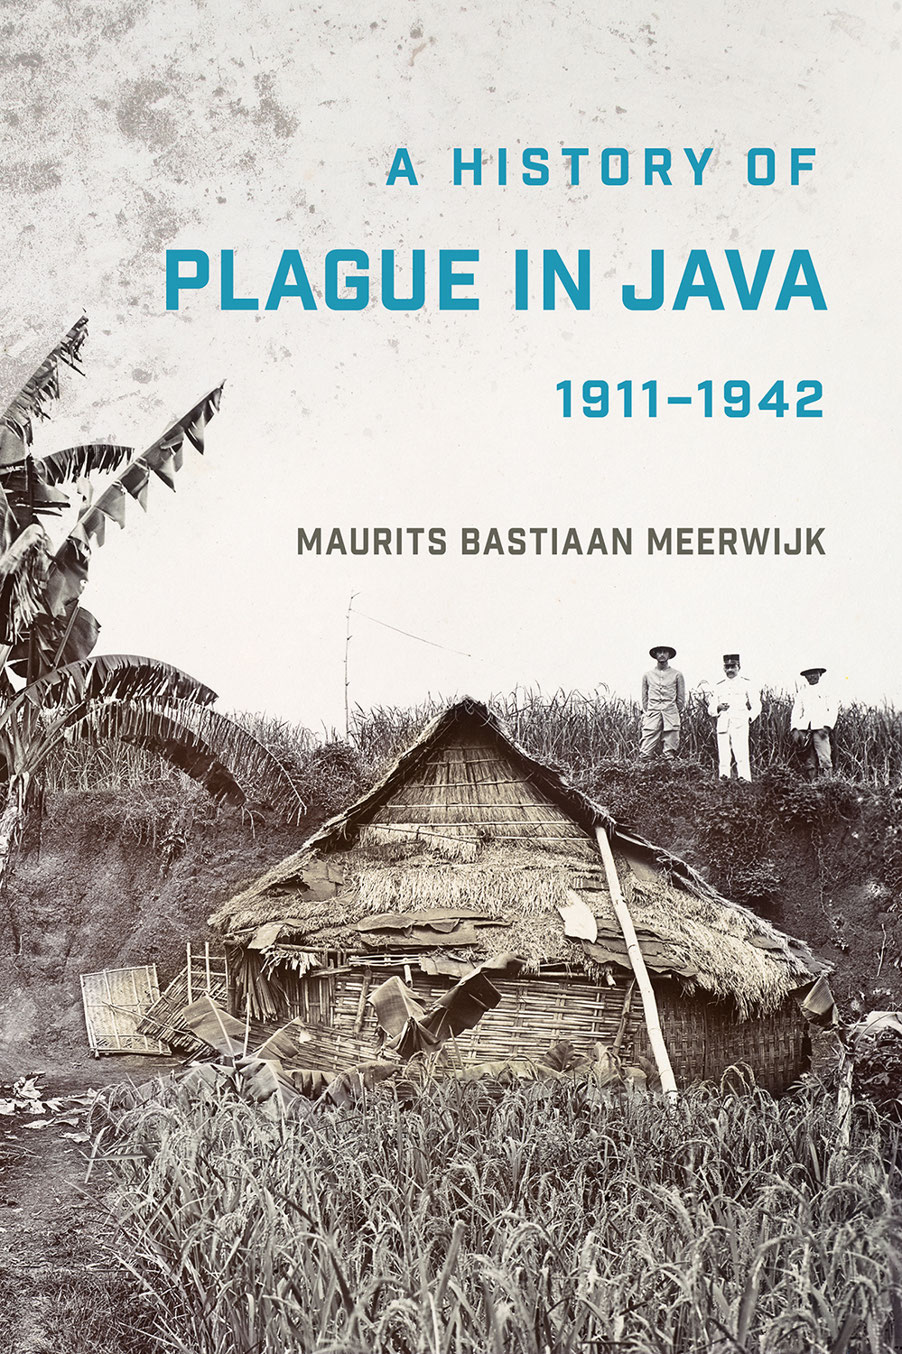 A HISTORY OF PLAGUE IN JAVA 19111942 MAURITS BASTIAAN MEERWIJK SOUTHEAST ASIA - photo 1